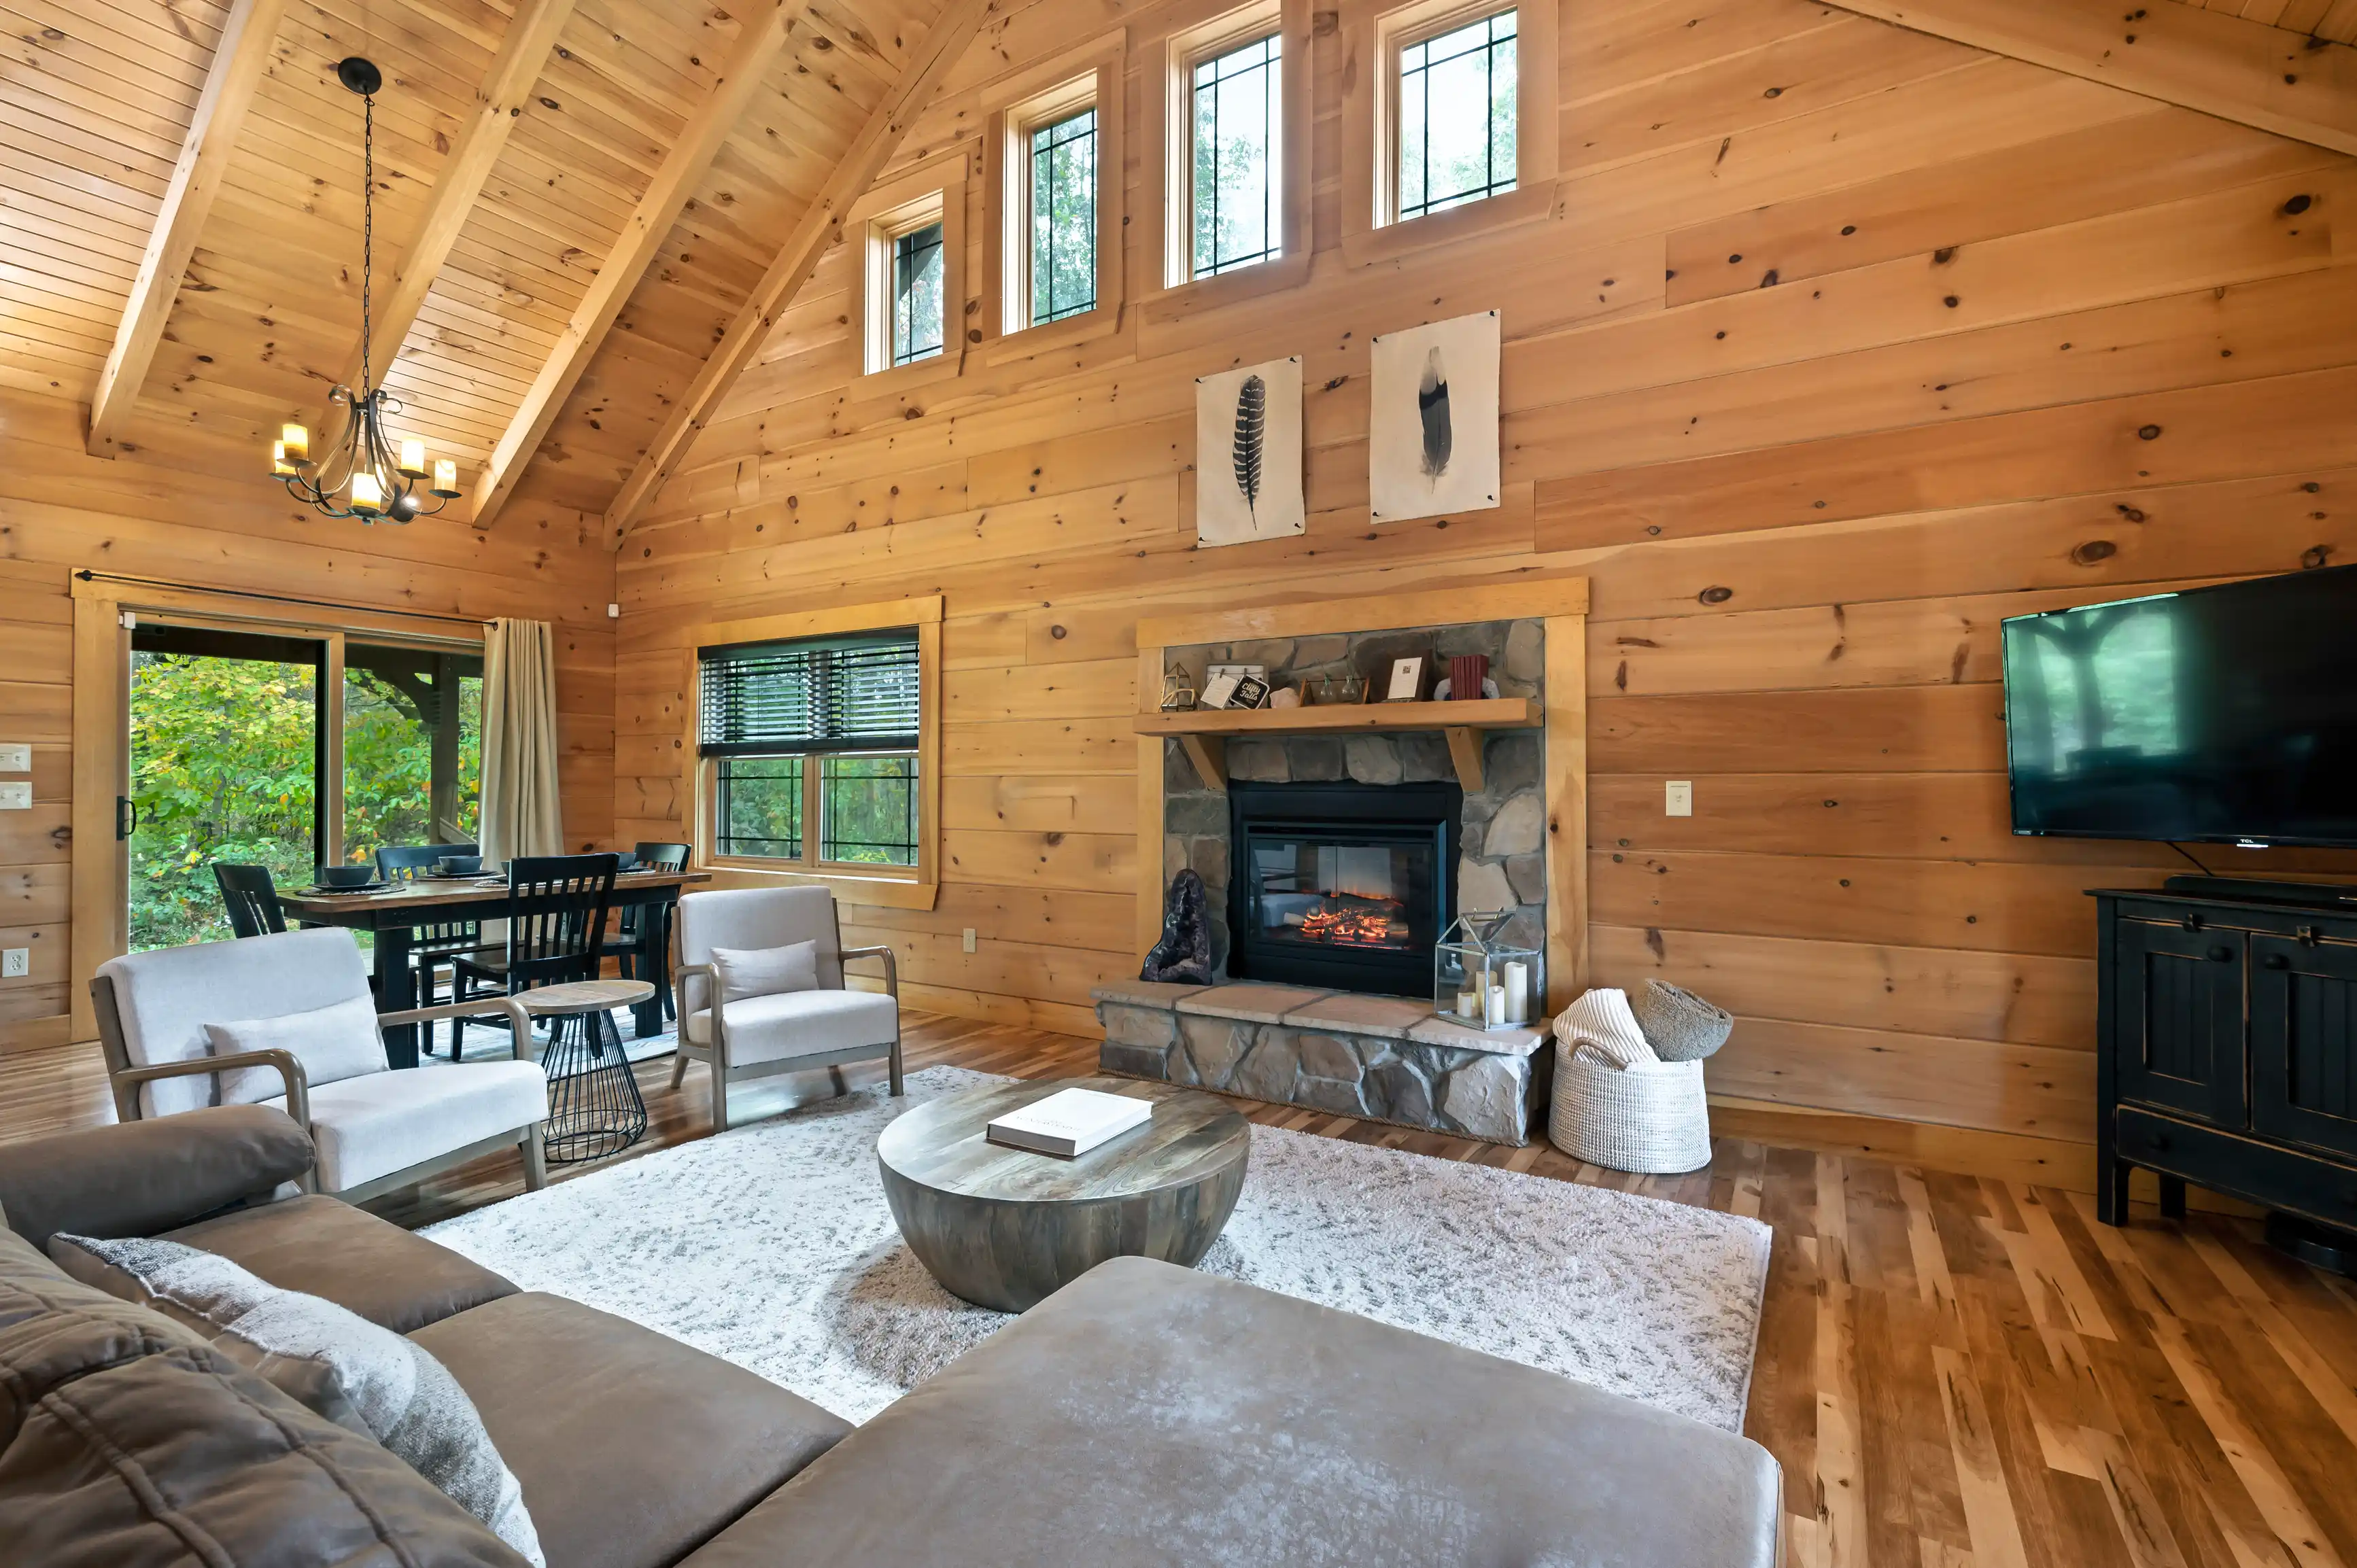 Cozy living room interior in a wooden cabin with a fireplace, comfortable seating, and modern amenities.